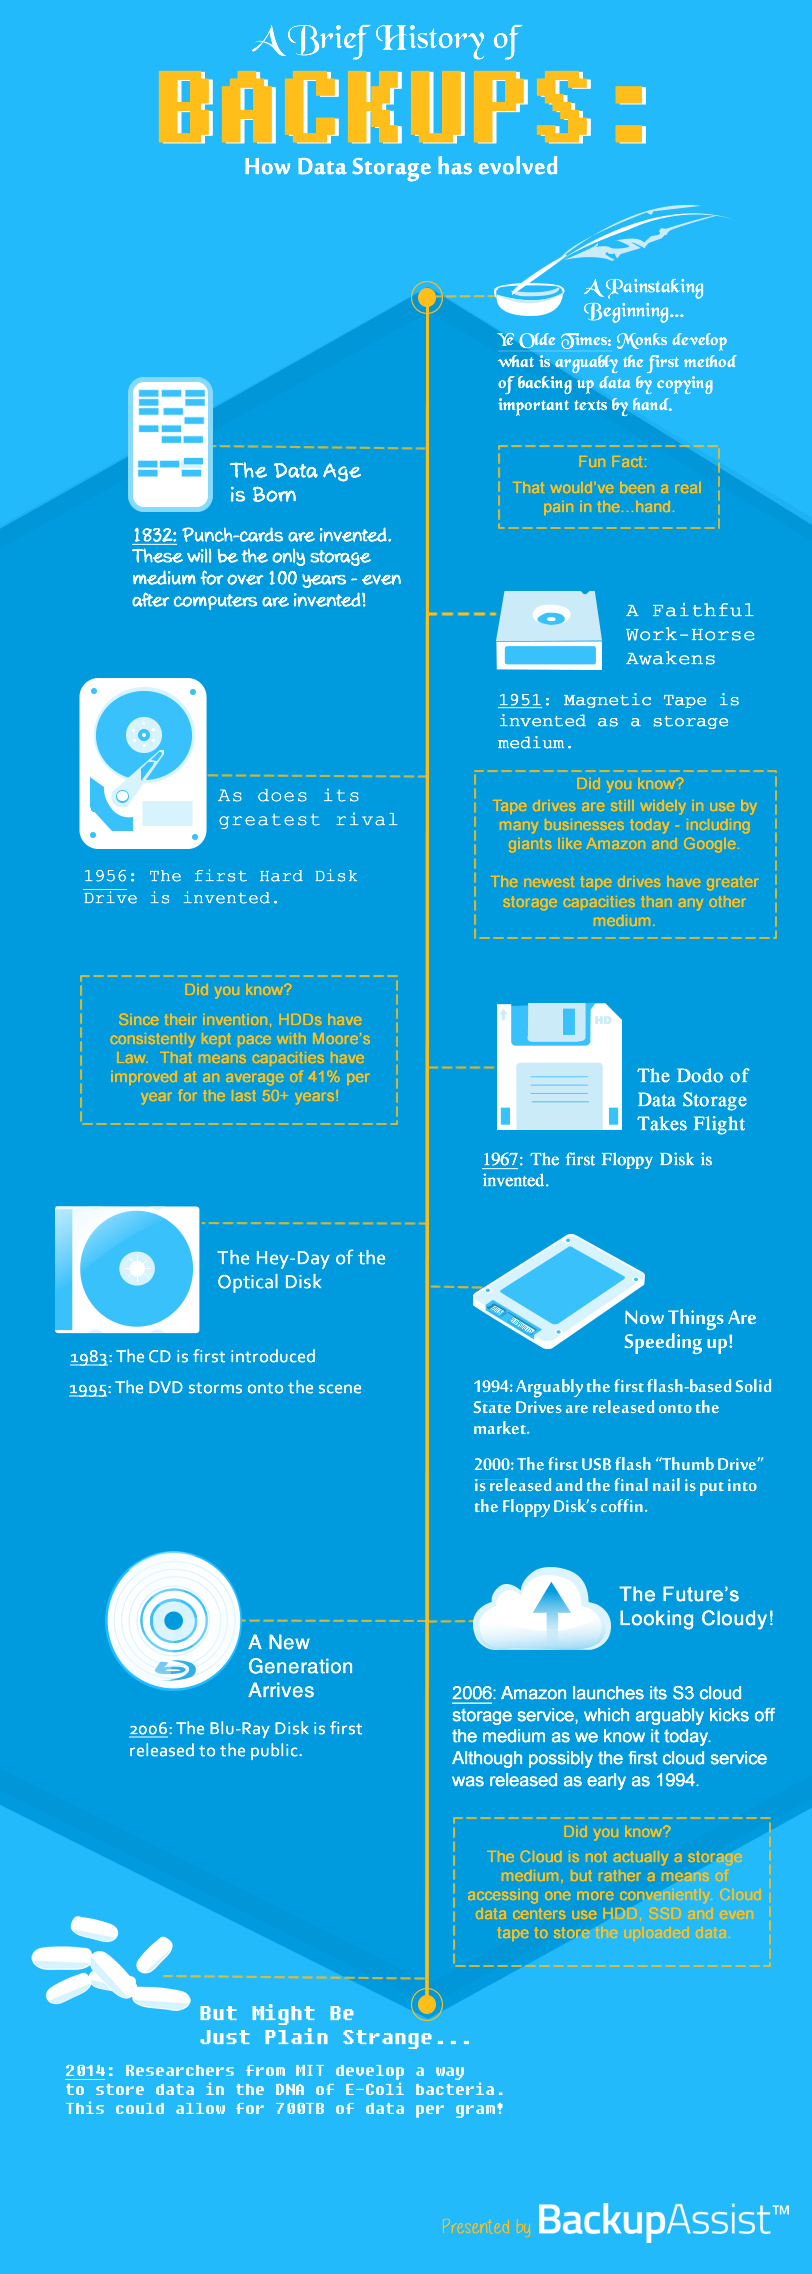 history-of-backups-infographic